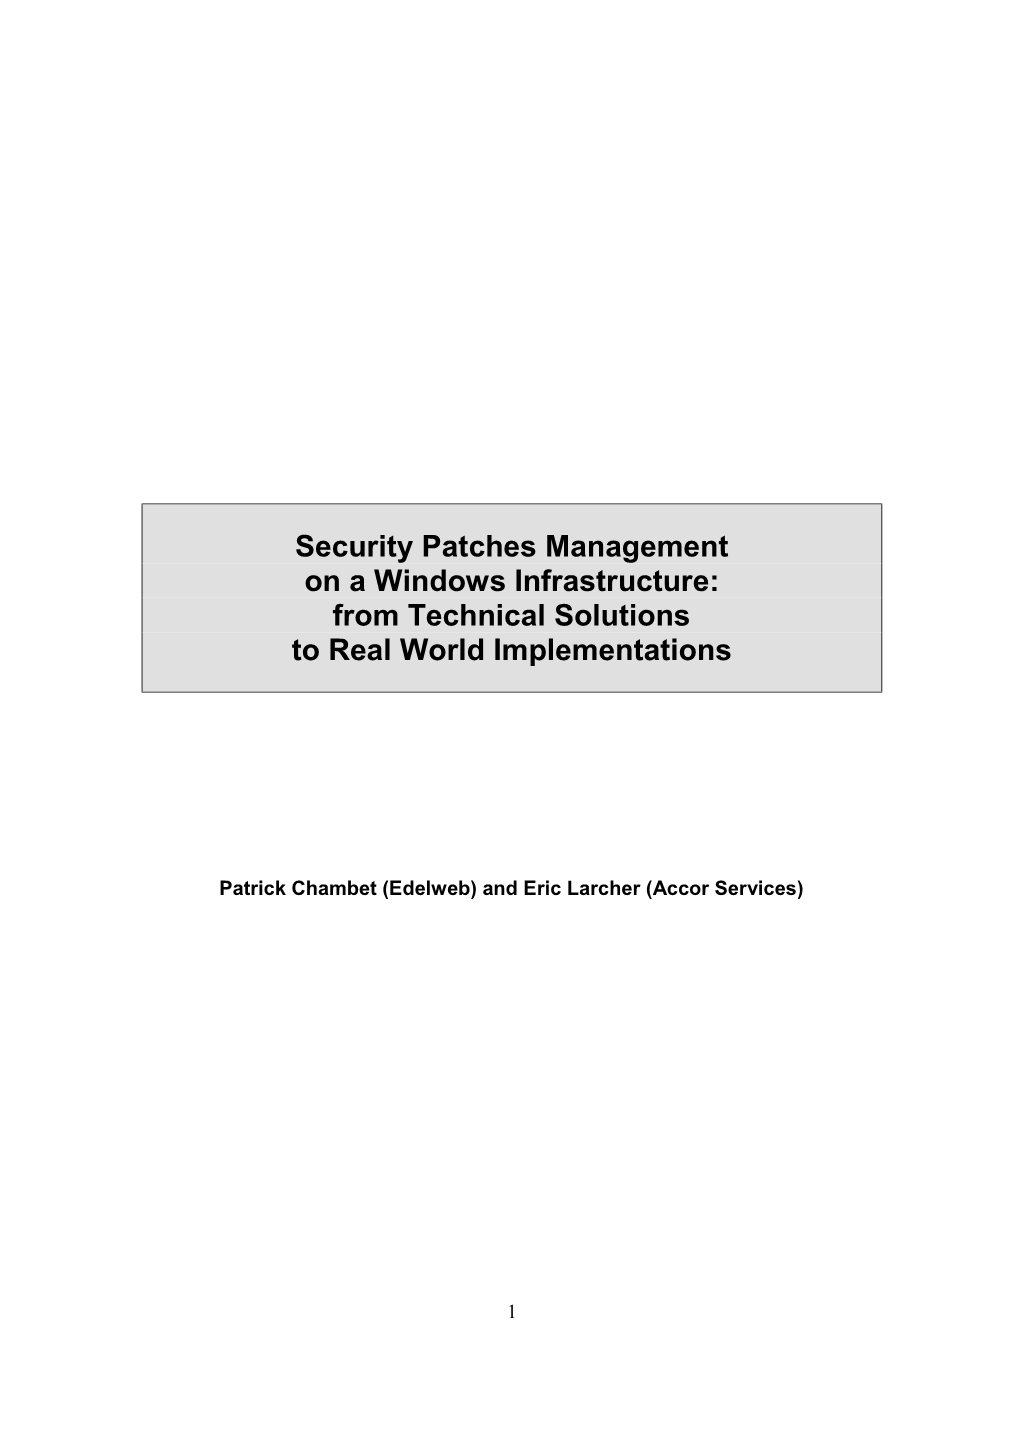 Security Patches Management on a Windows Infrastructure: from Technical Solutions to Real World Implementations